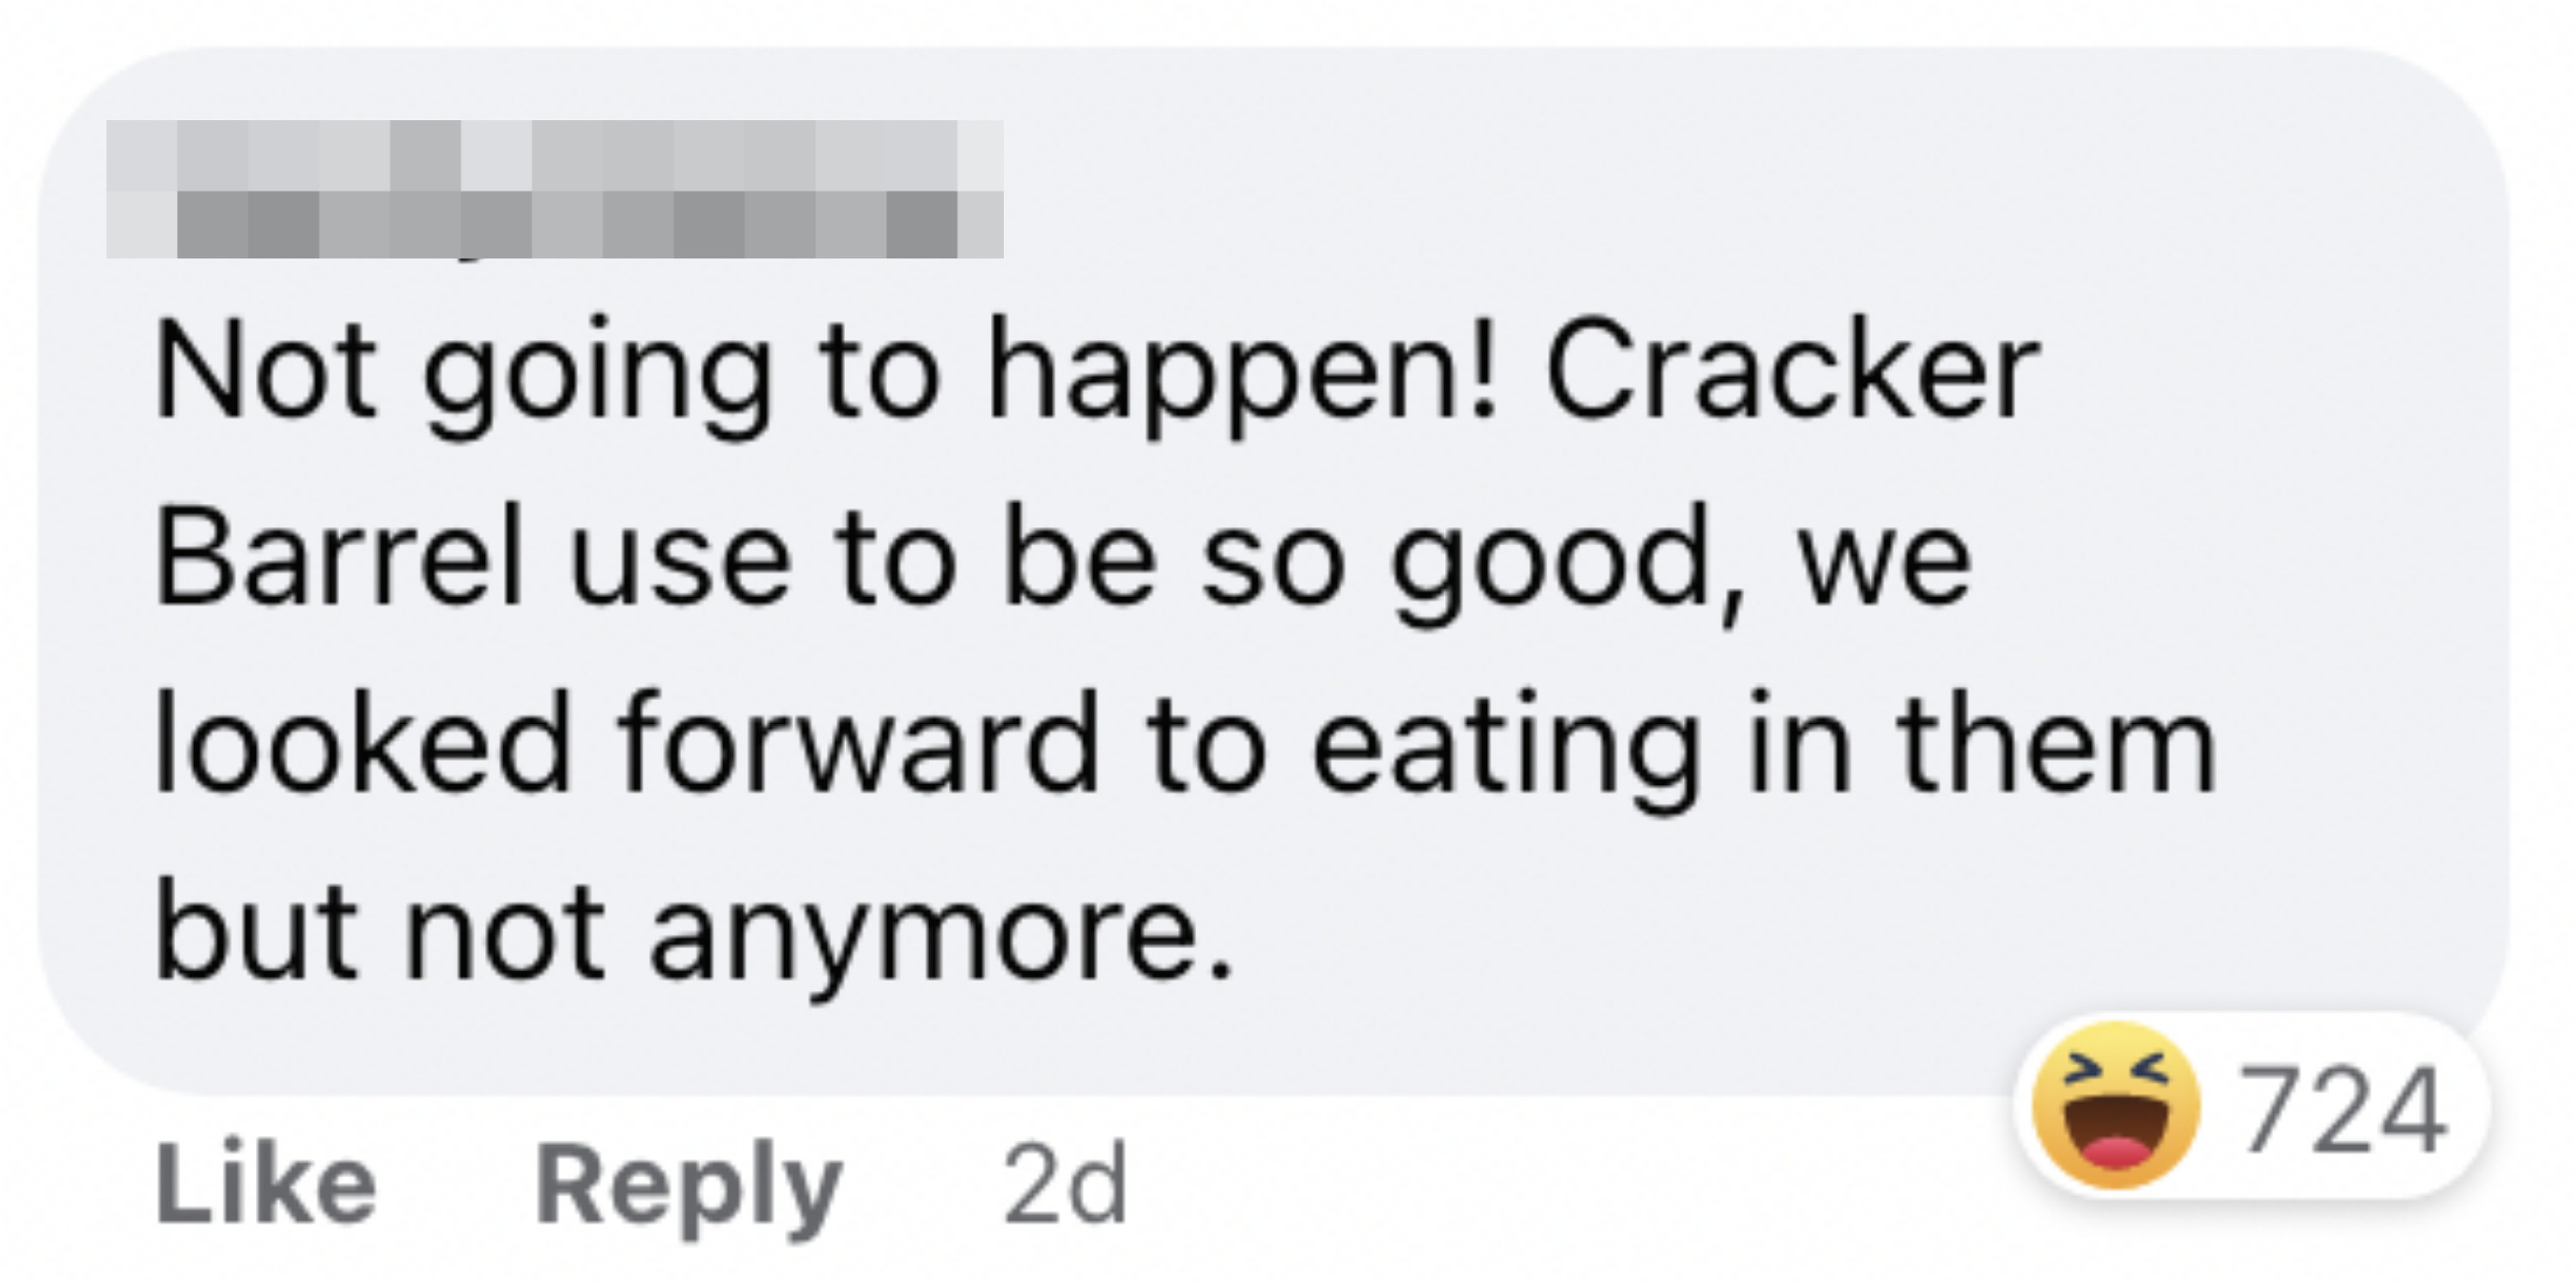 One person said &quot;Not going to happen! Cracker Barrel use to be so good, we looked forward to eating in them but not anymore&quot;